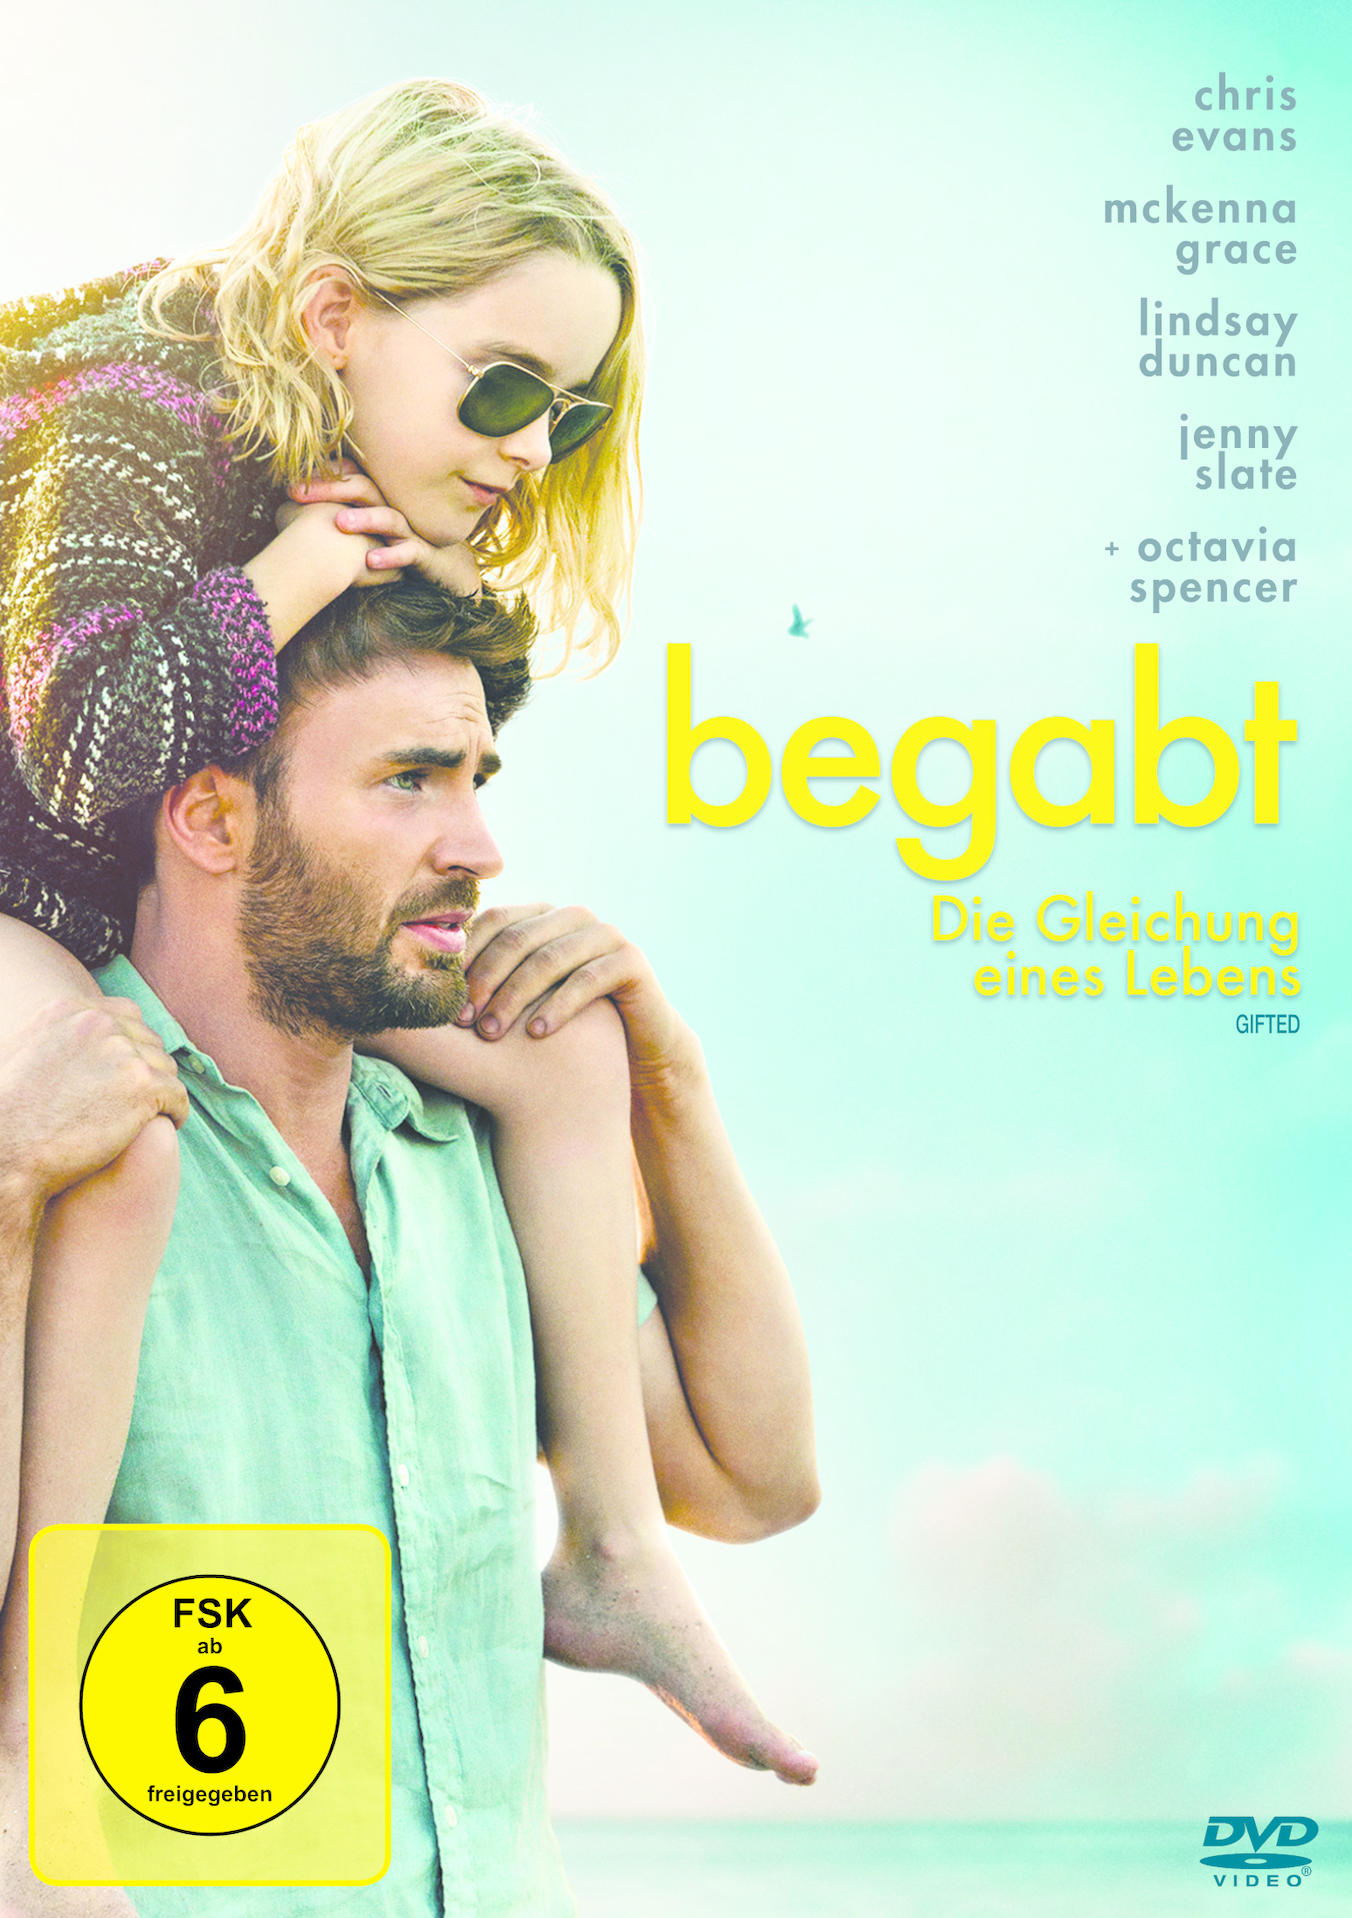 BEGABT-GIFTED DVD